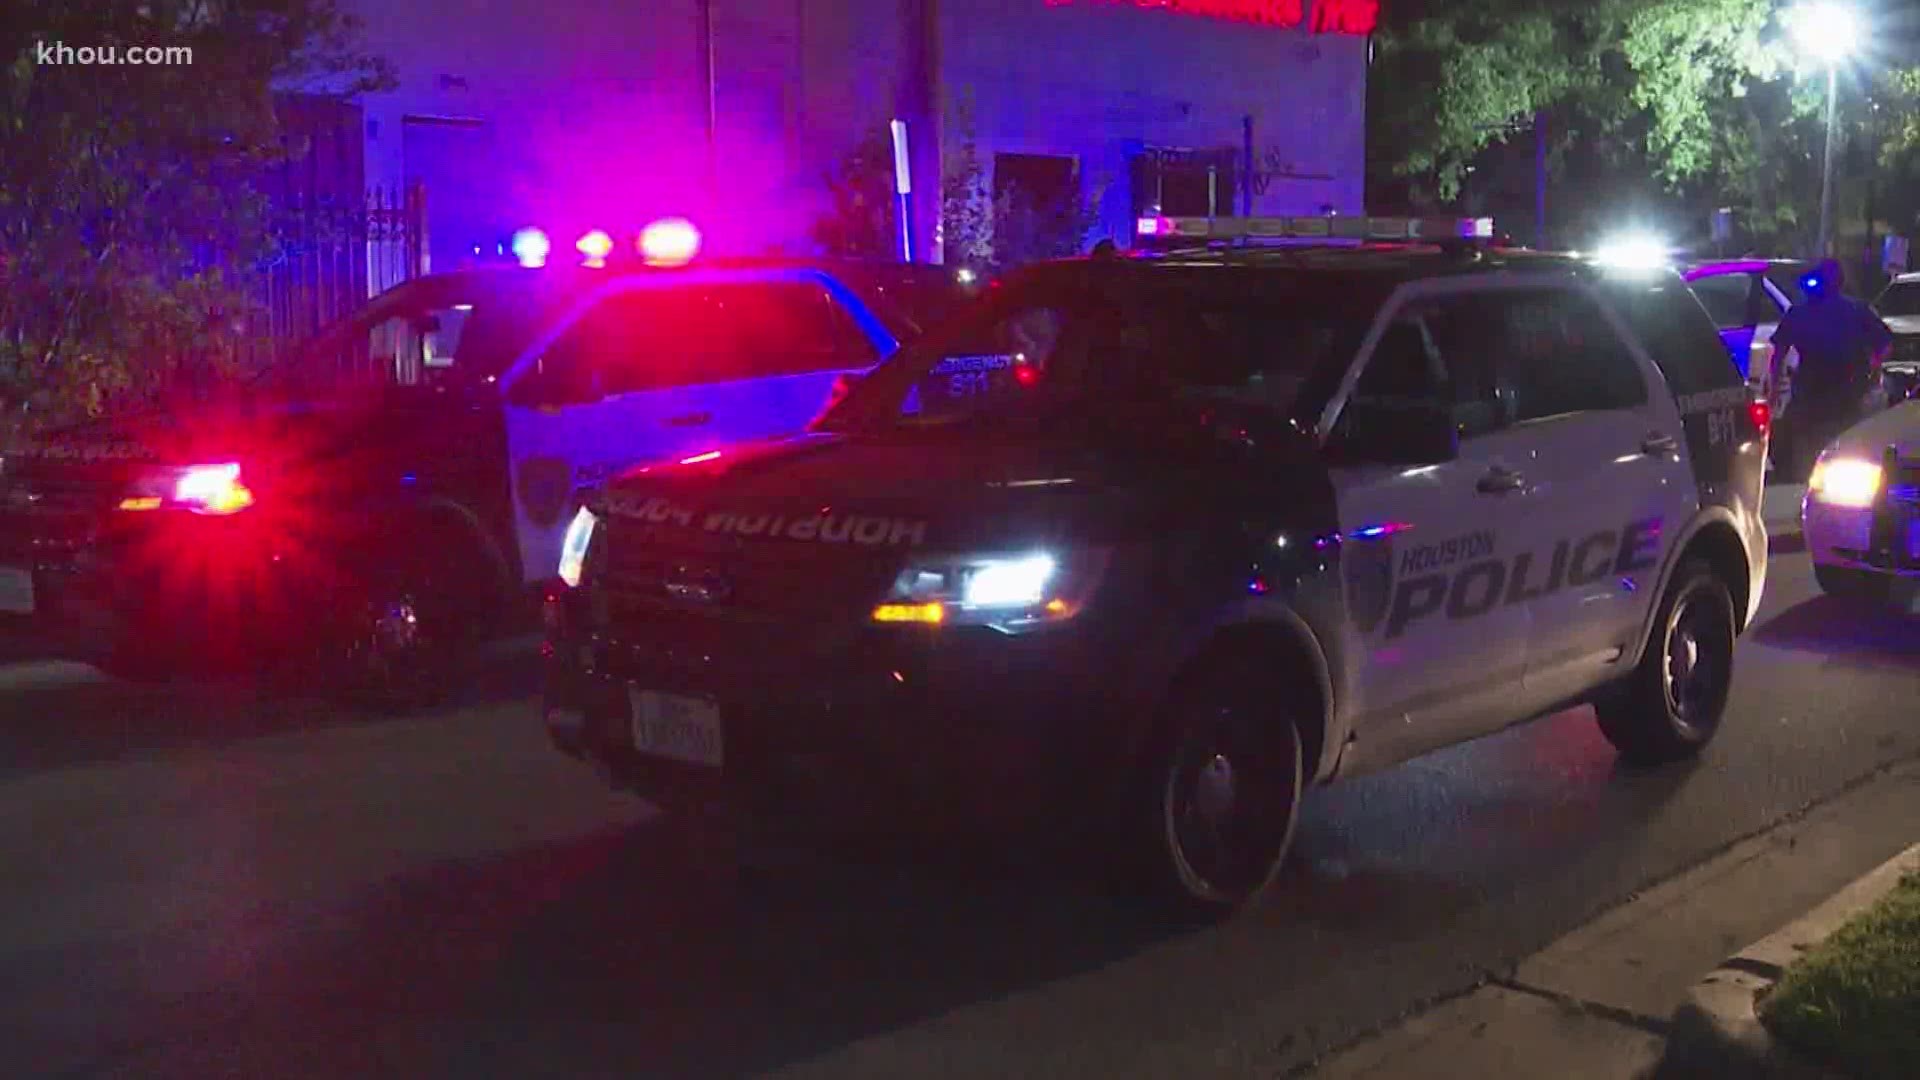 Houston police are investigating a shooting in Midtown that left four people injured, one critical.